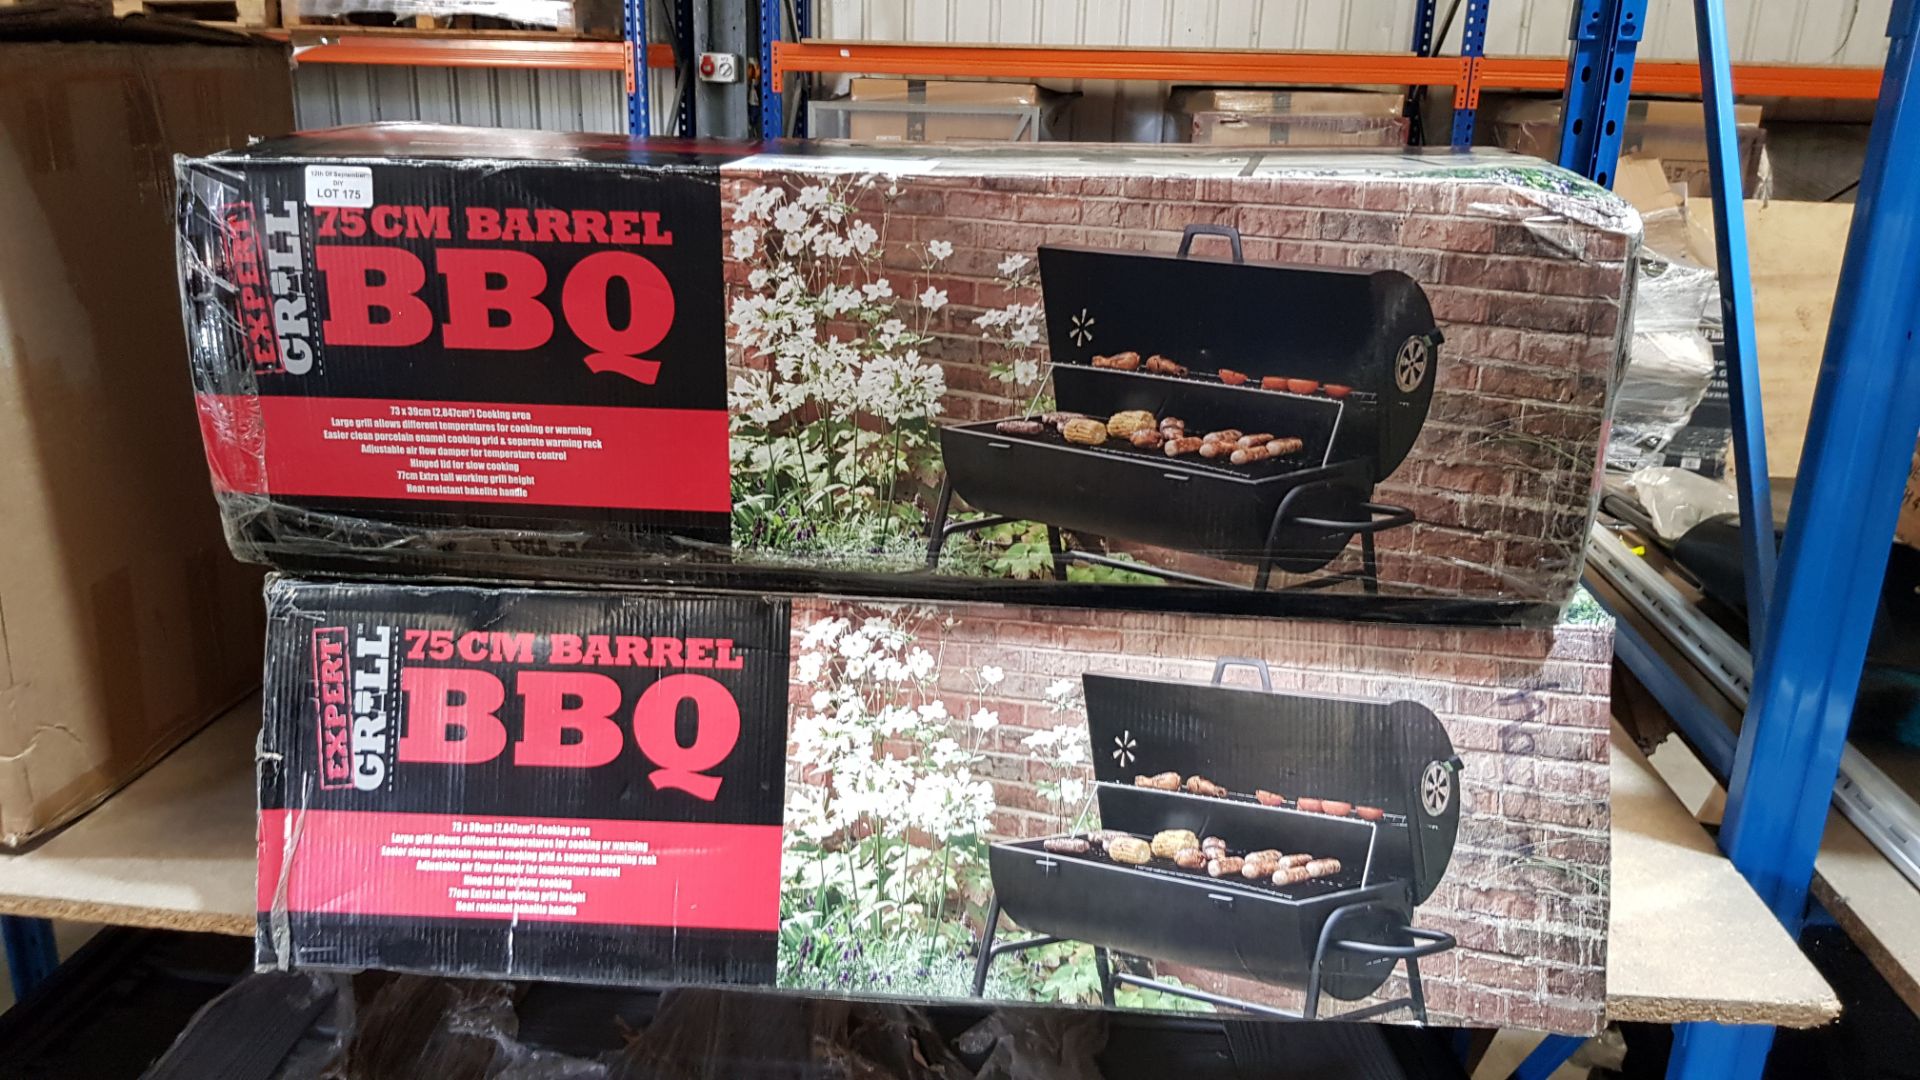 (R10E) 2x Expert Grill 75cm Barrel BBQ. Opened To Check Contents. Both Units Look Clean, Unused. (S - Image 3 of 5